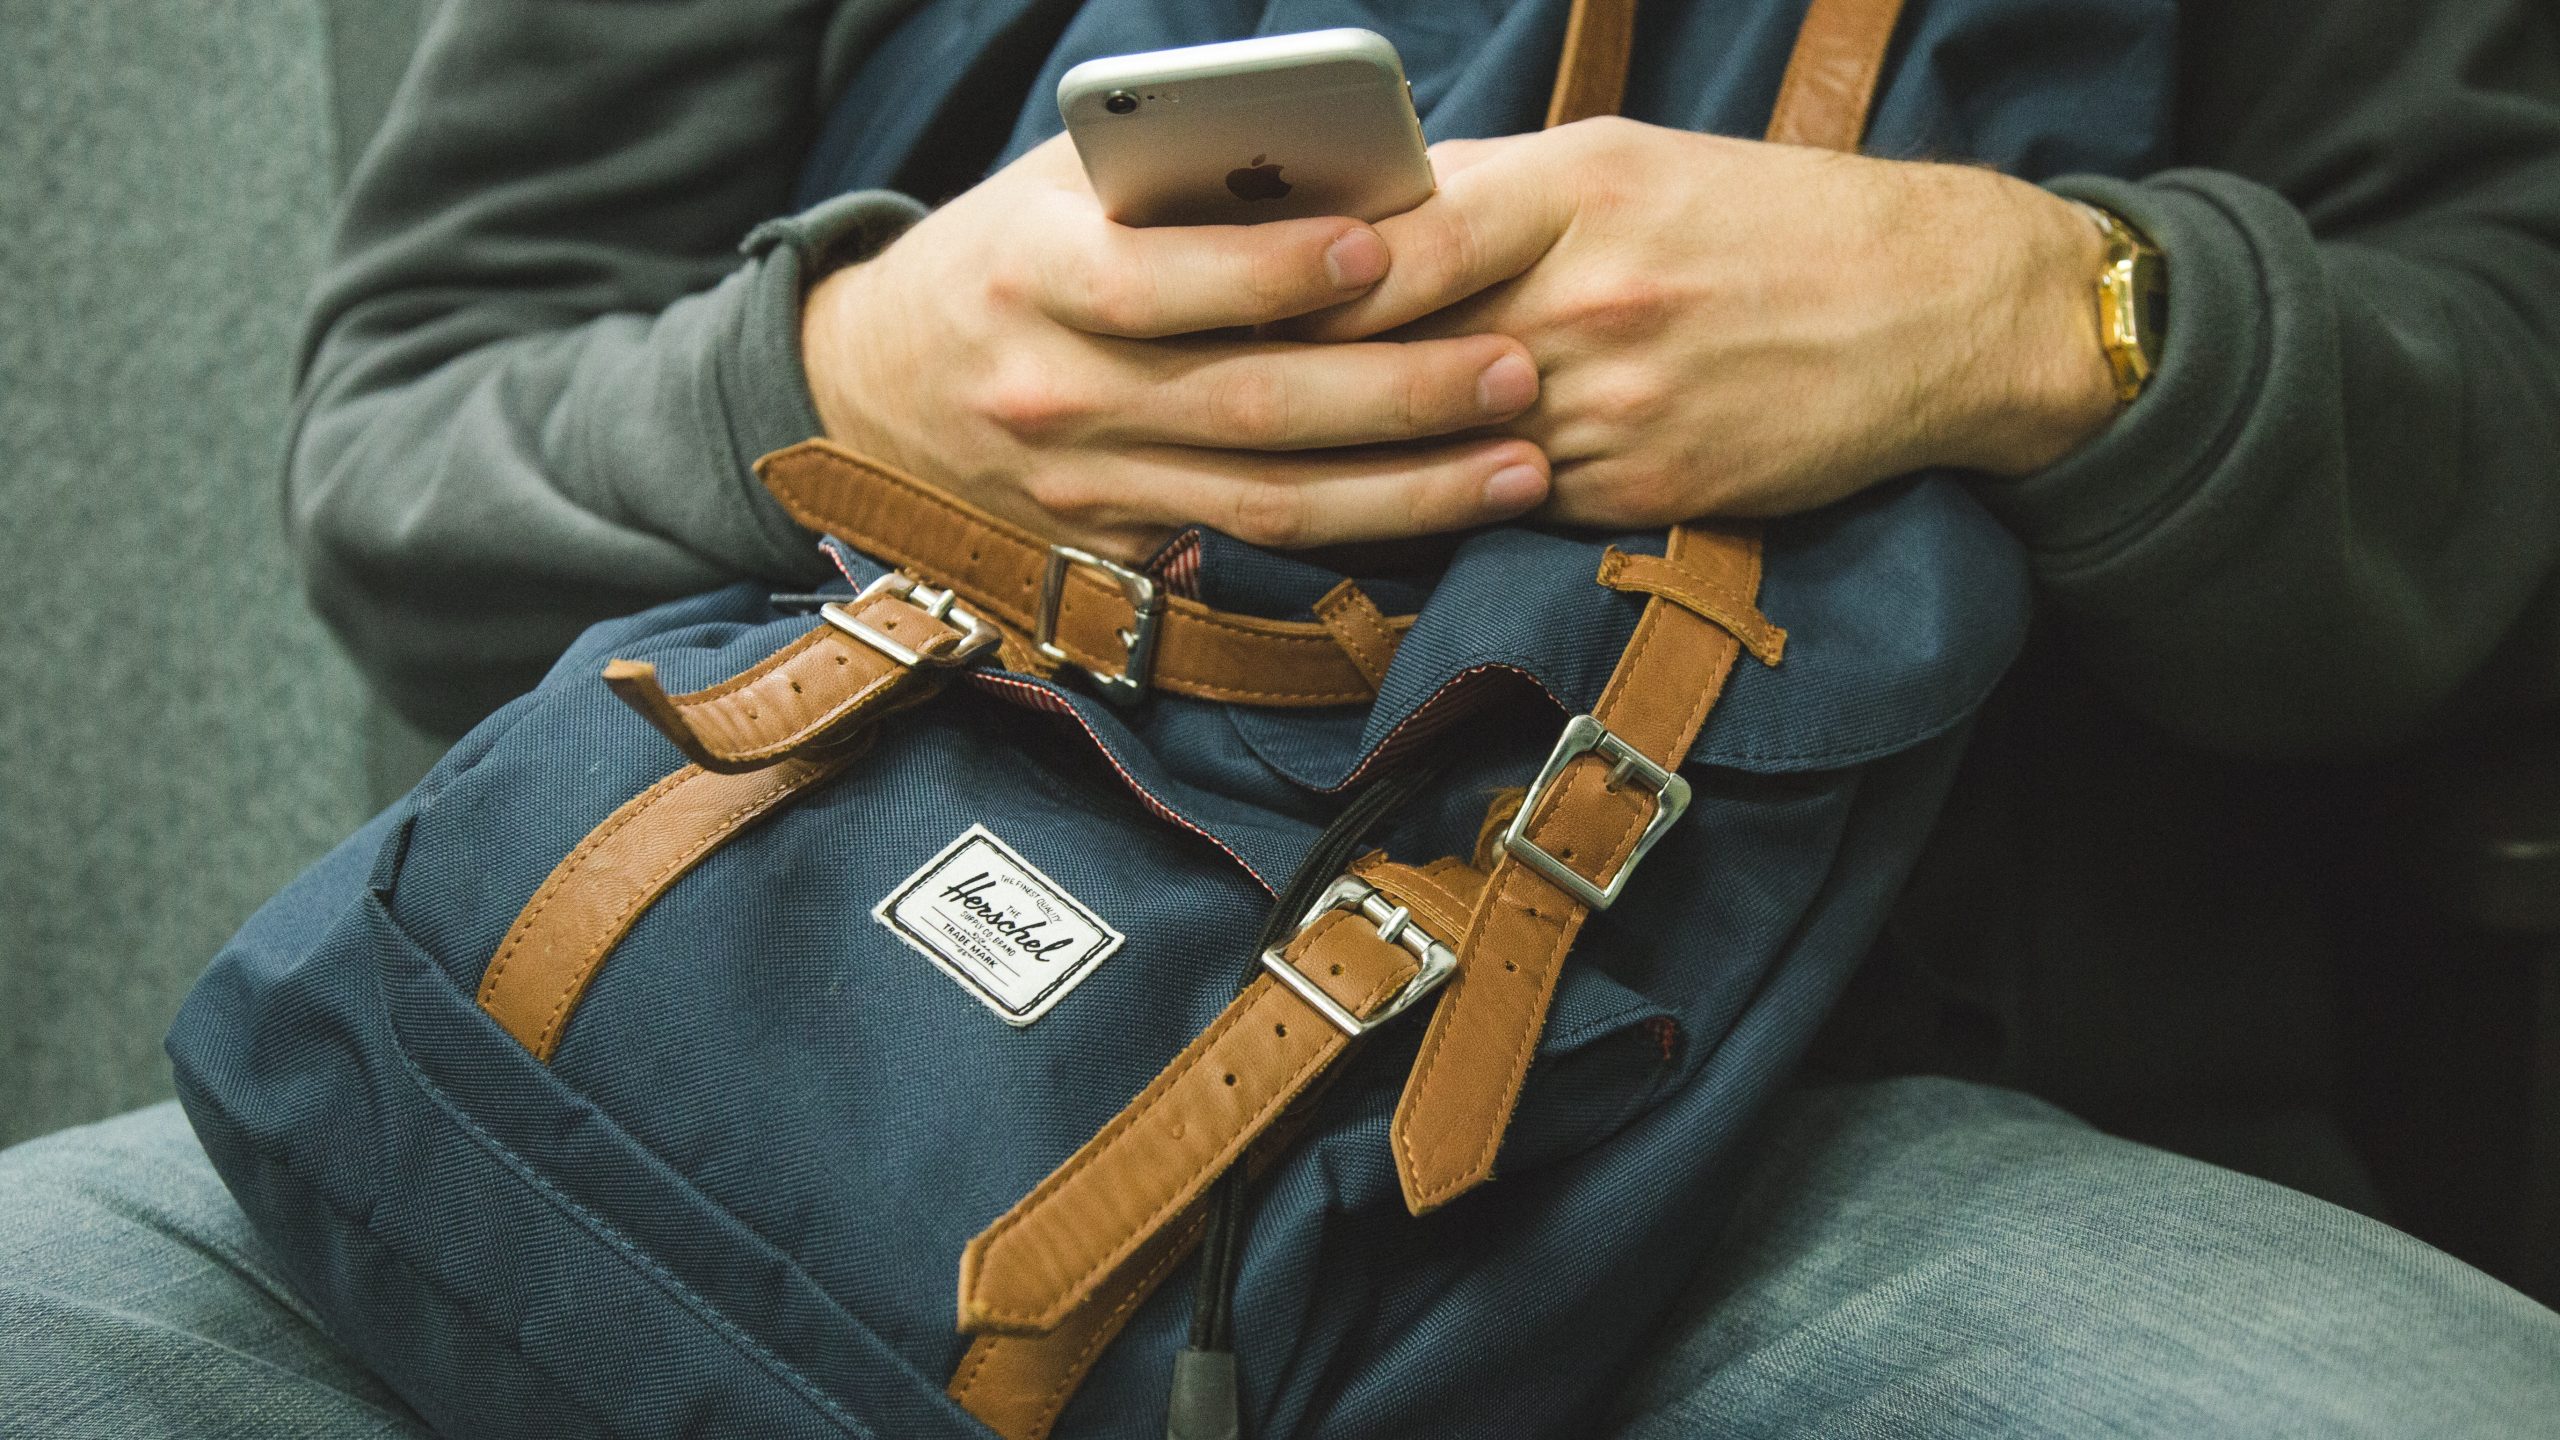 Man sitting on a chair with a backpack, checking his mobile.